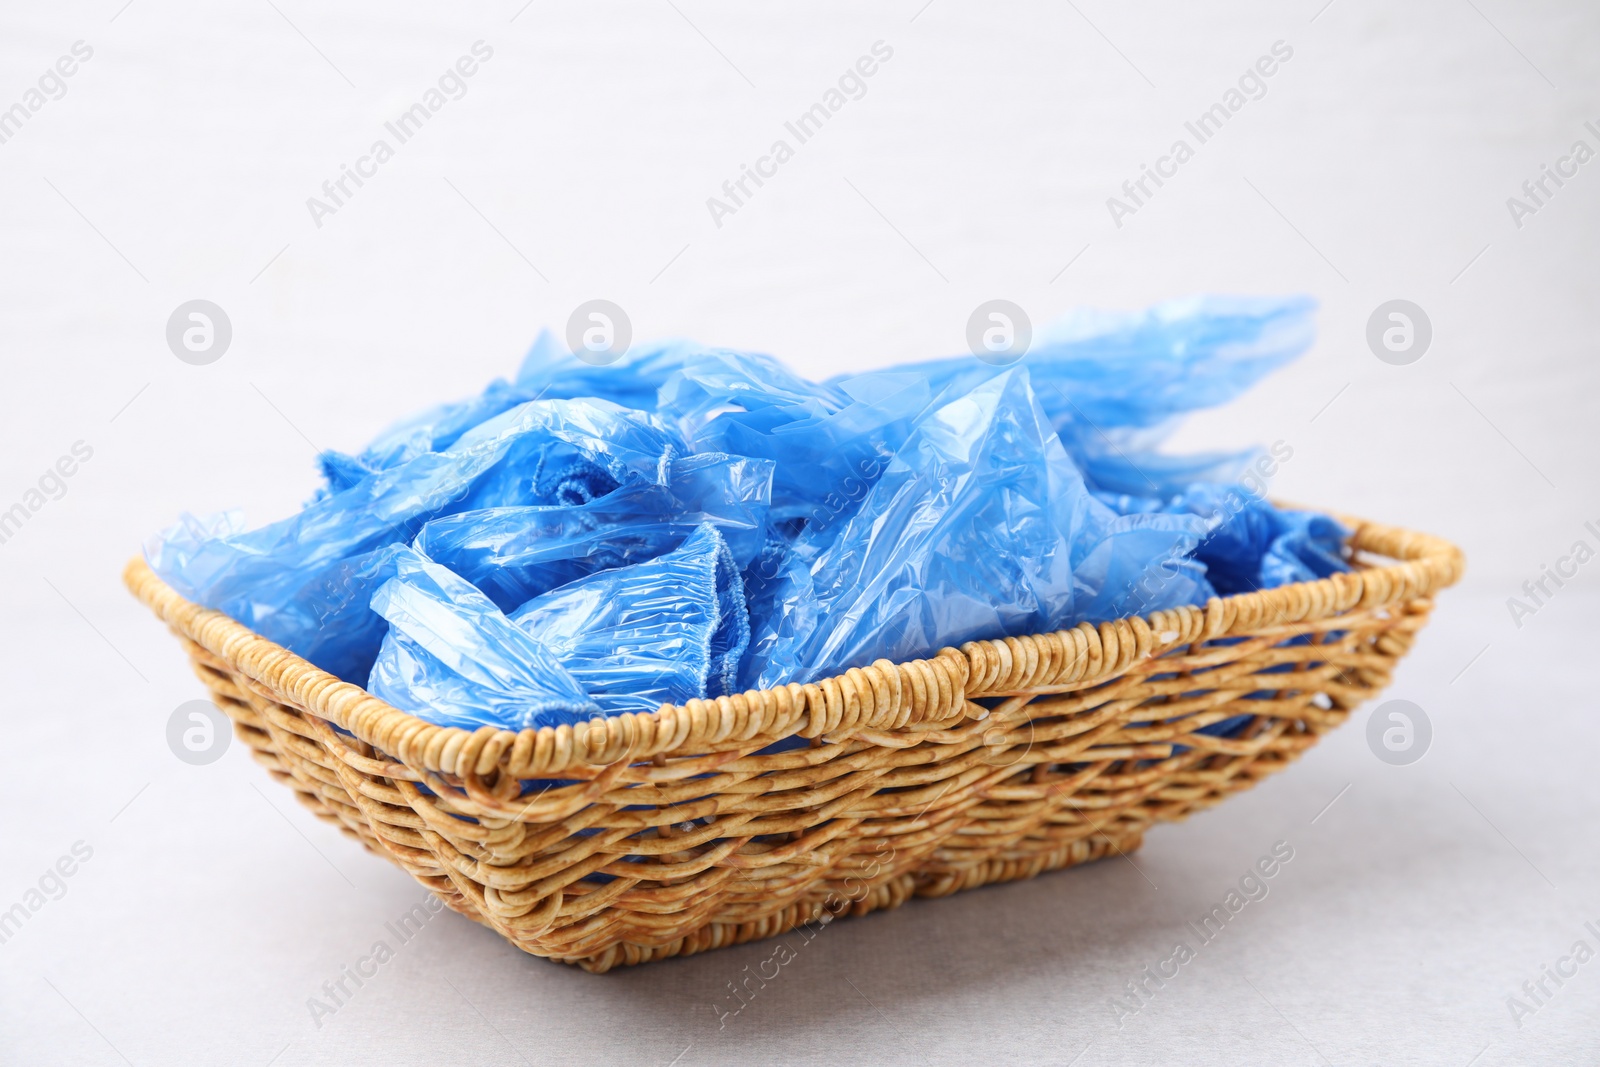 Photo of Blue medical shoe covers in wicker basket on light background, closeup